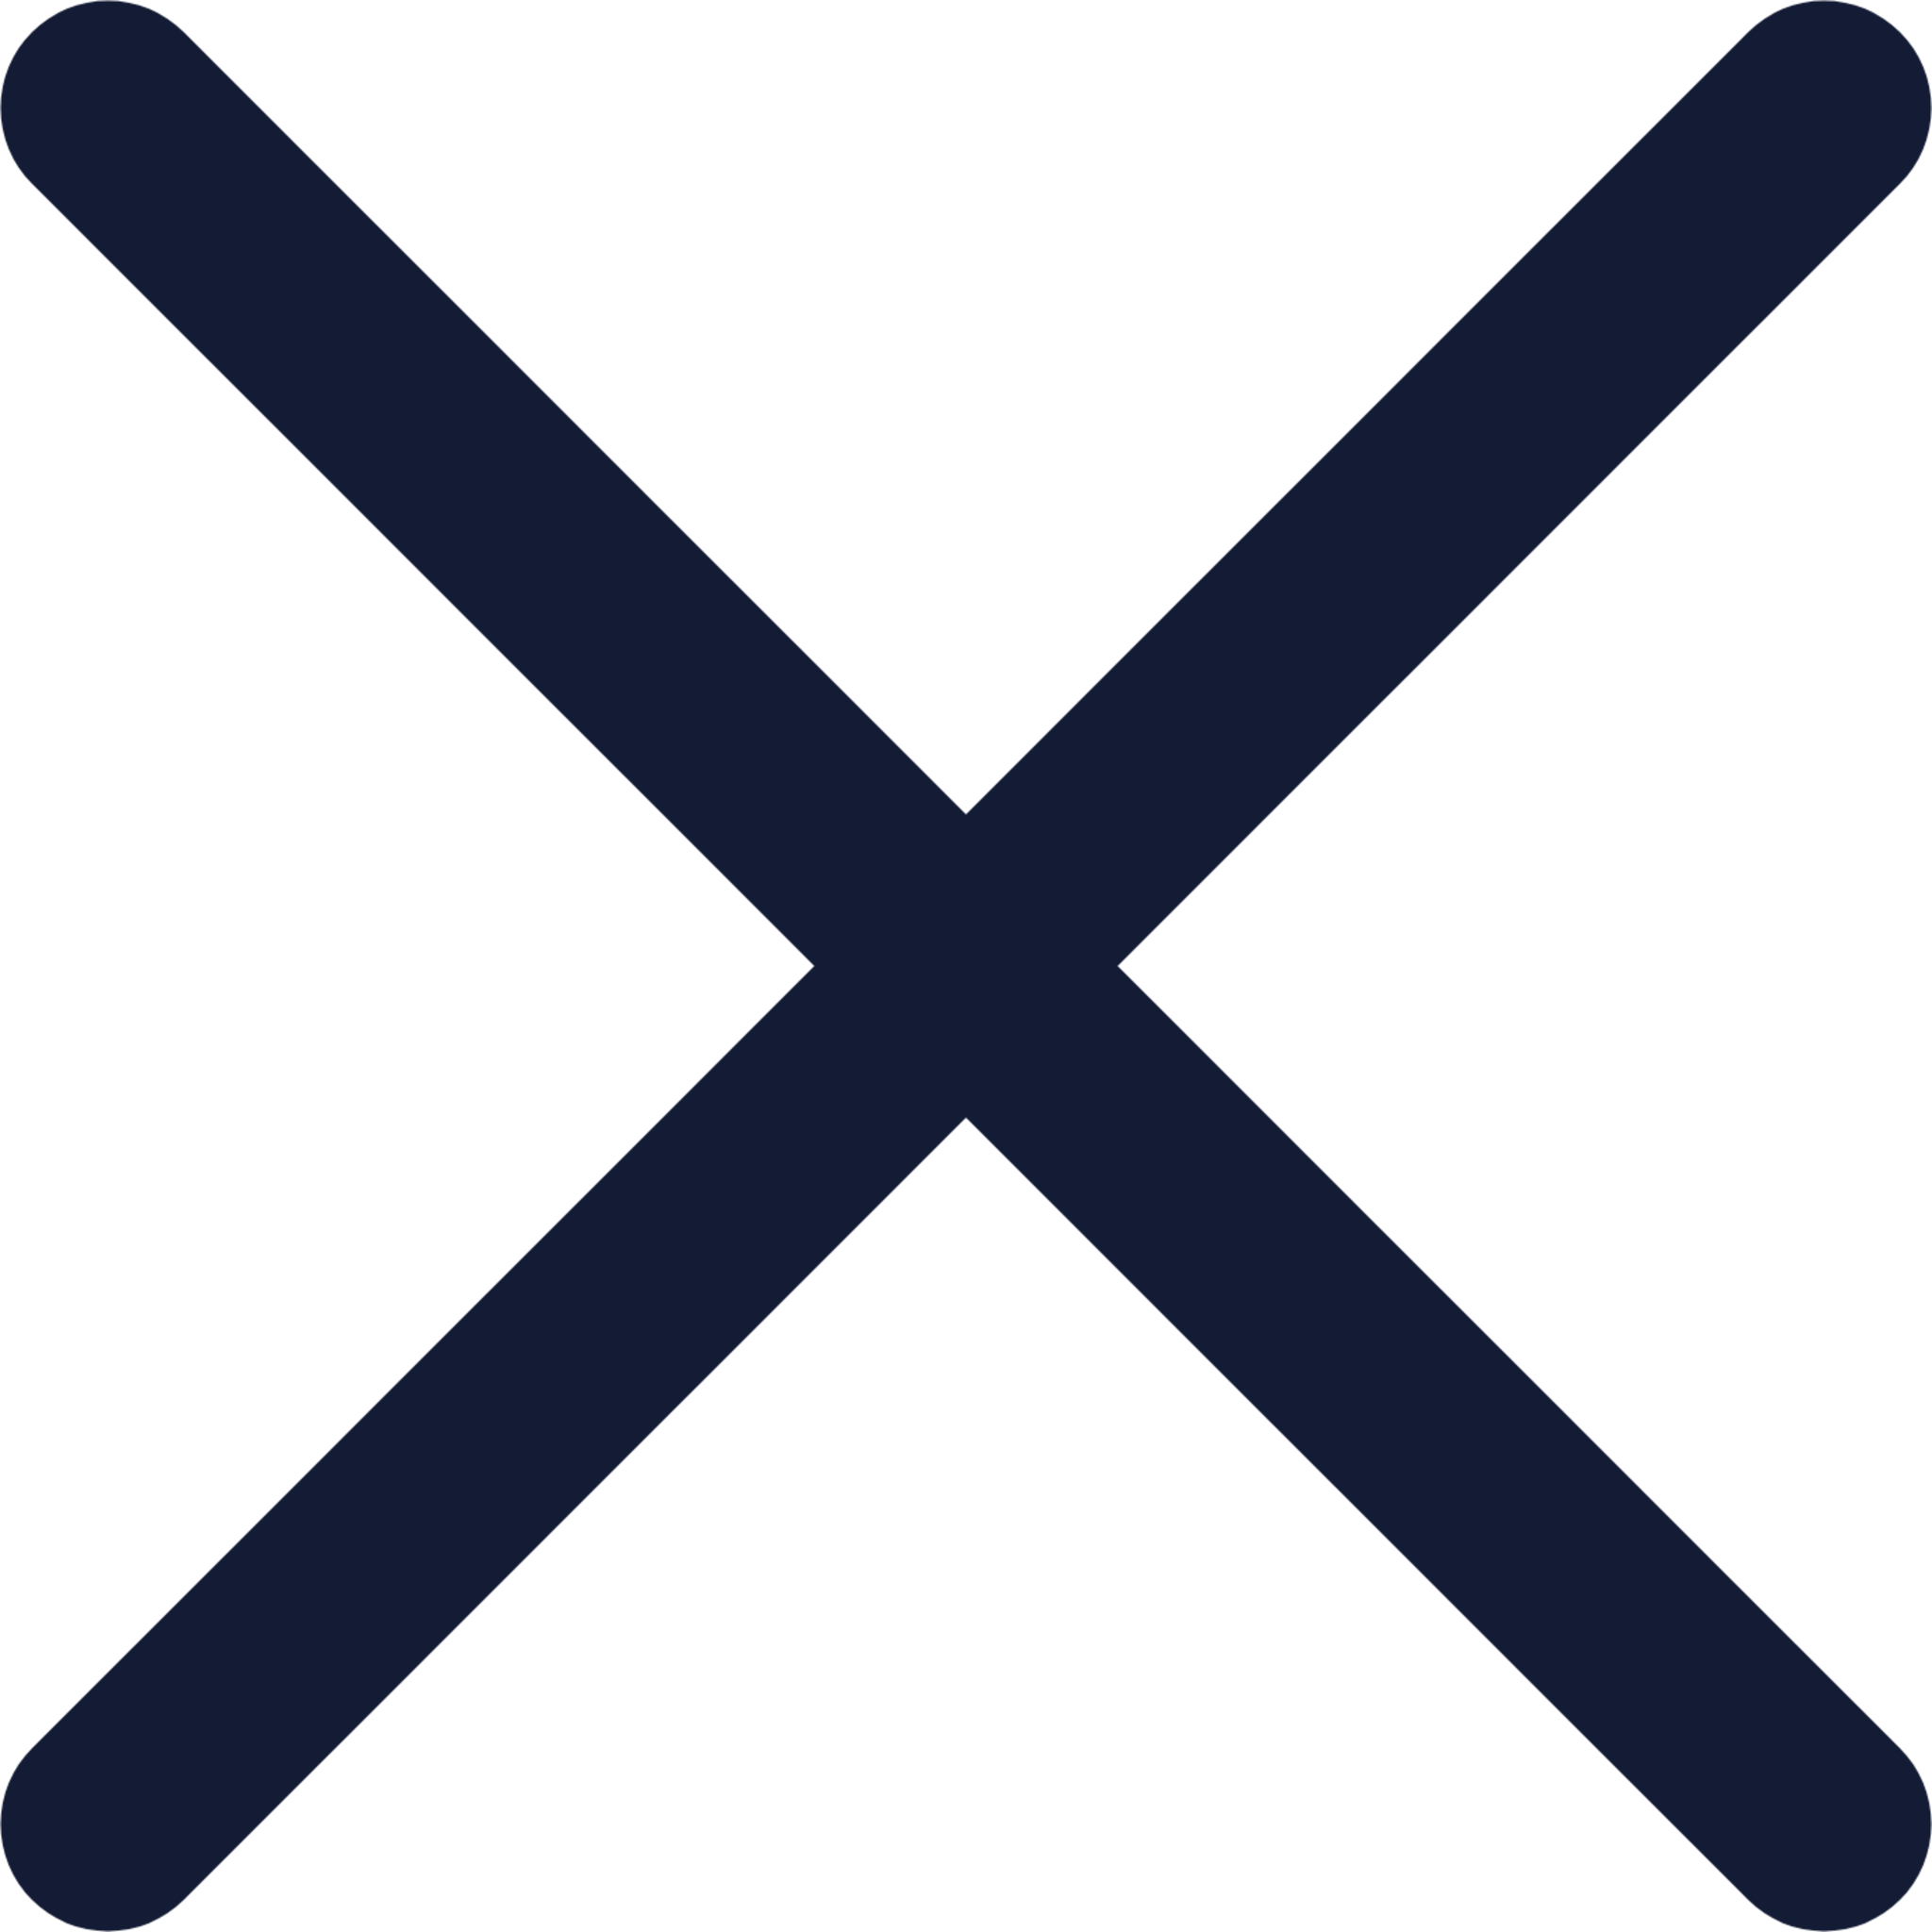 multiplication sign icon